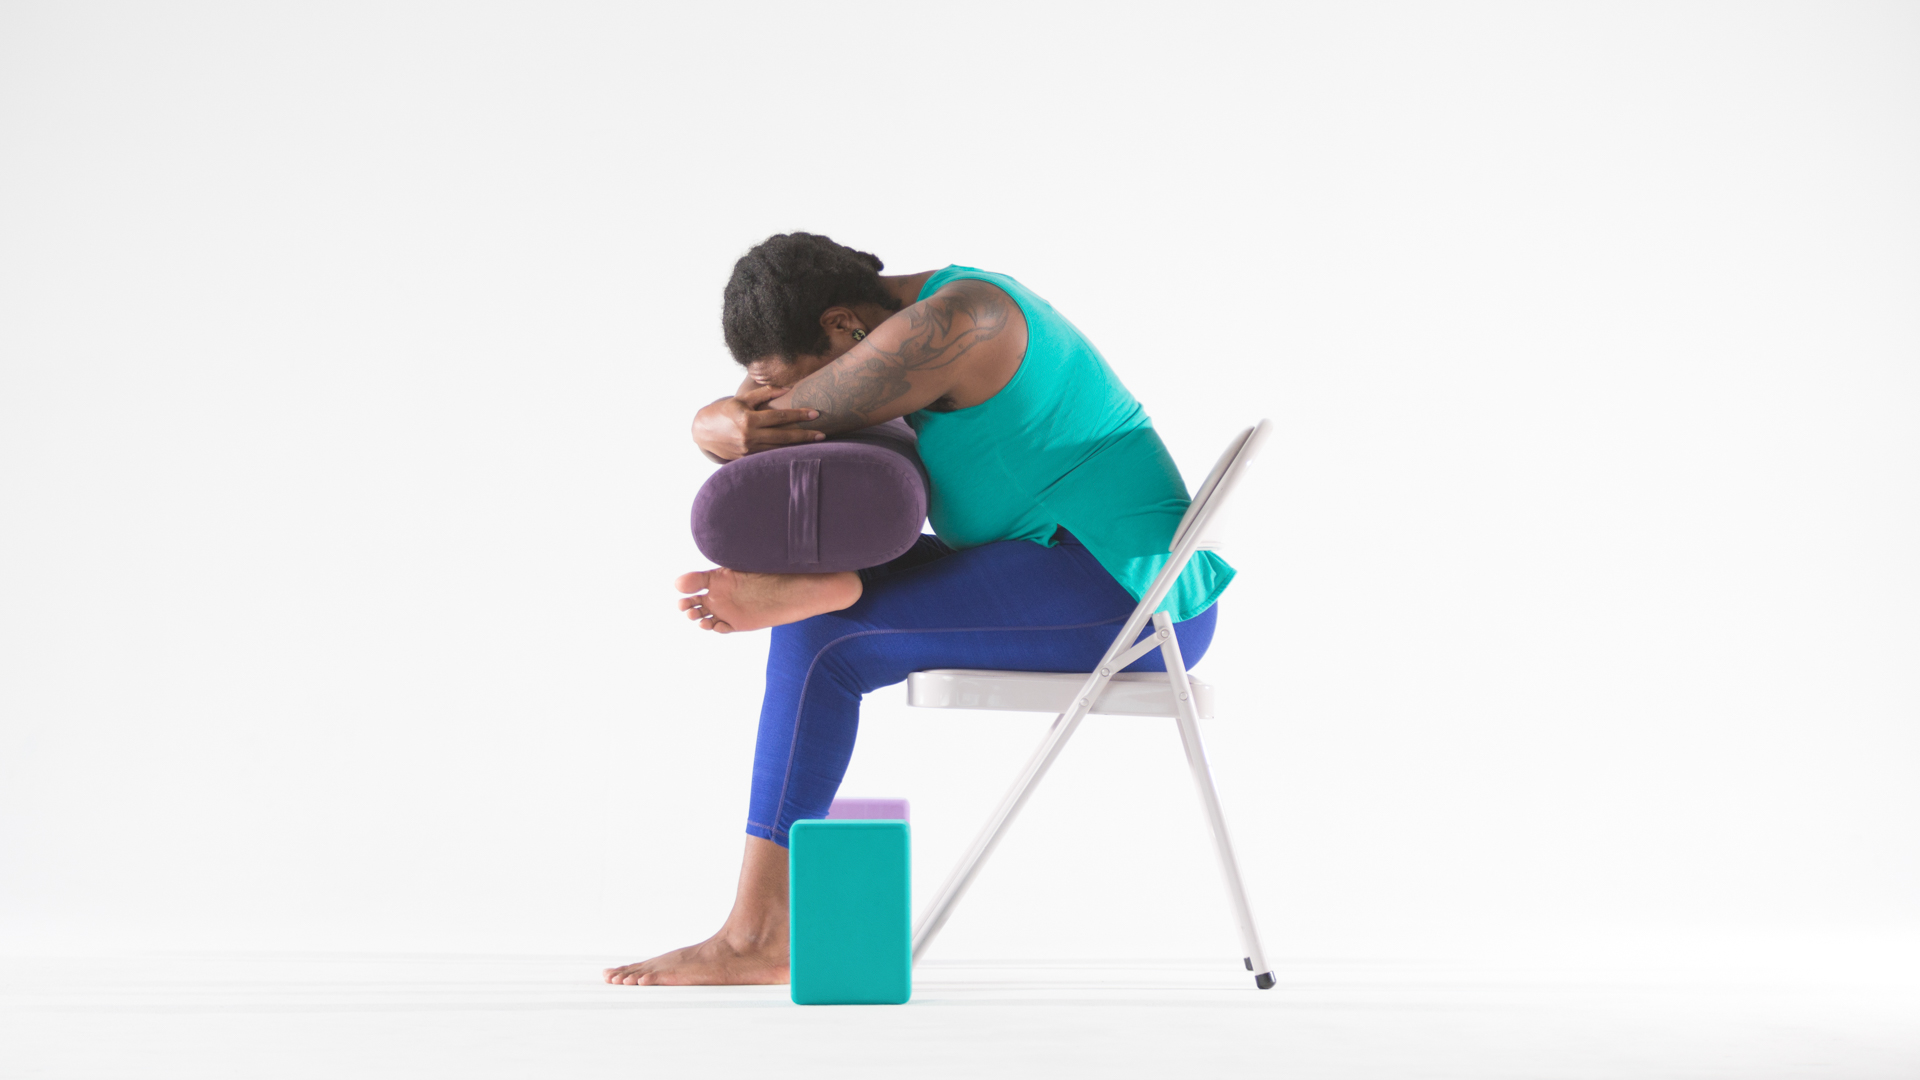 How to Do Pigeon Pose in Yoga | The Output by Peloton